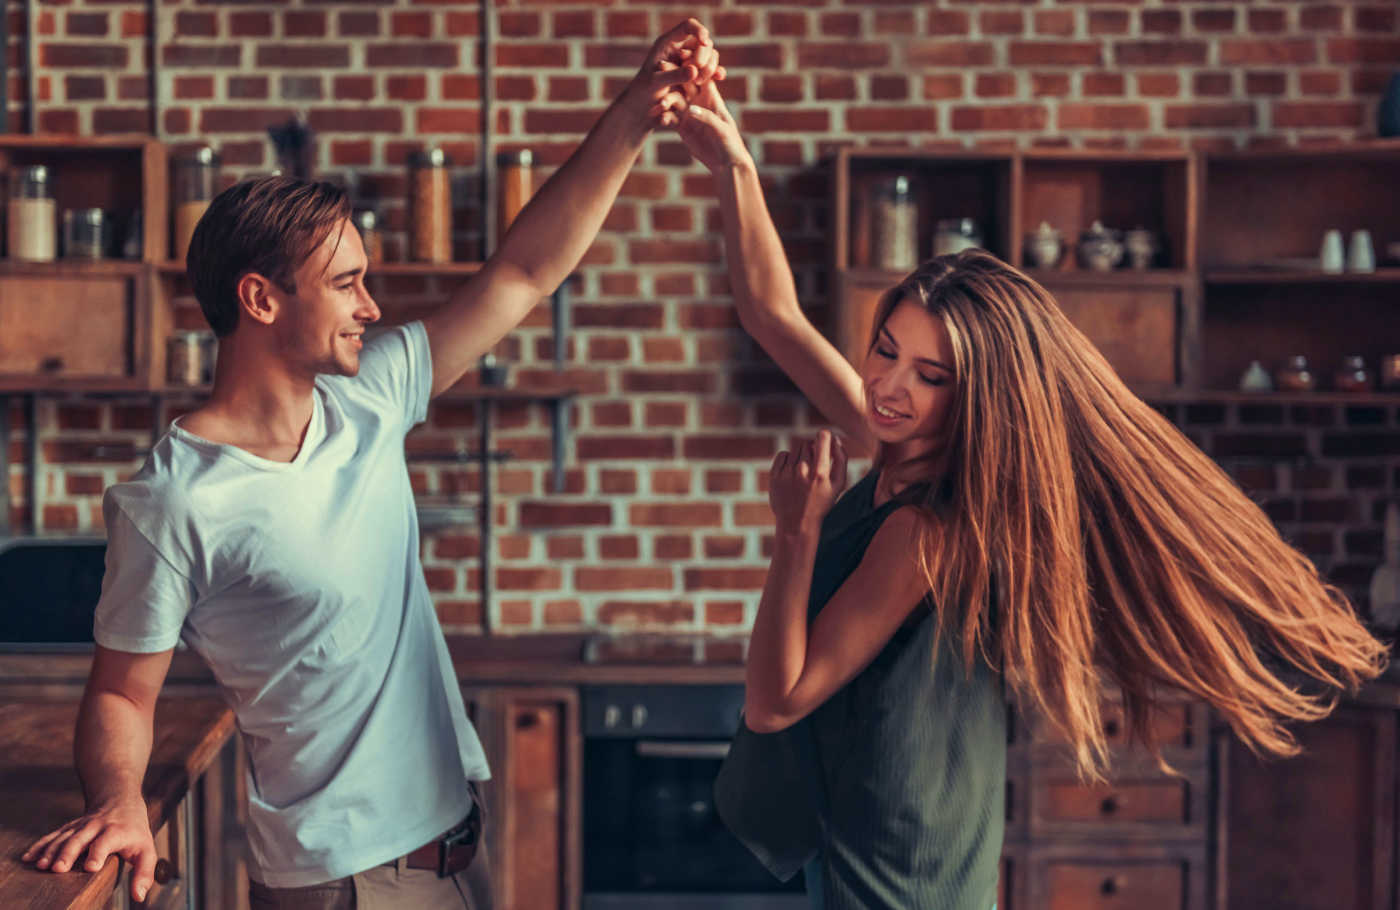 14 Things to Talk About for a Healthy Relationship » True Love Words